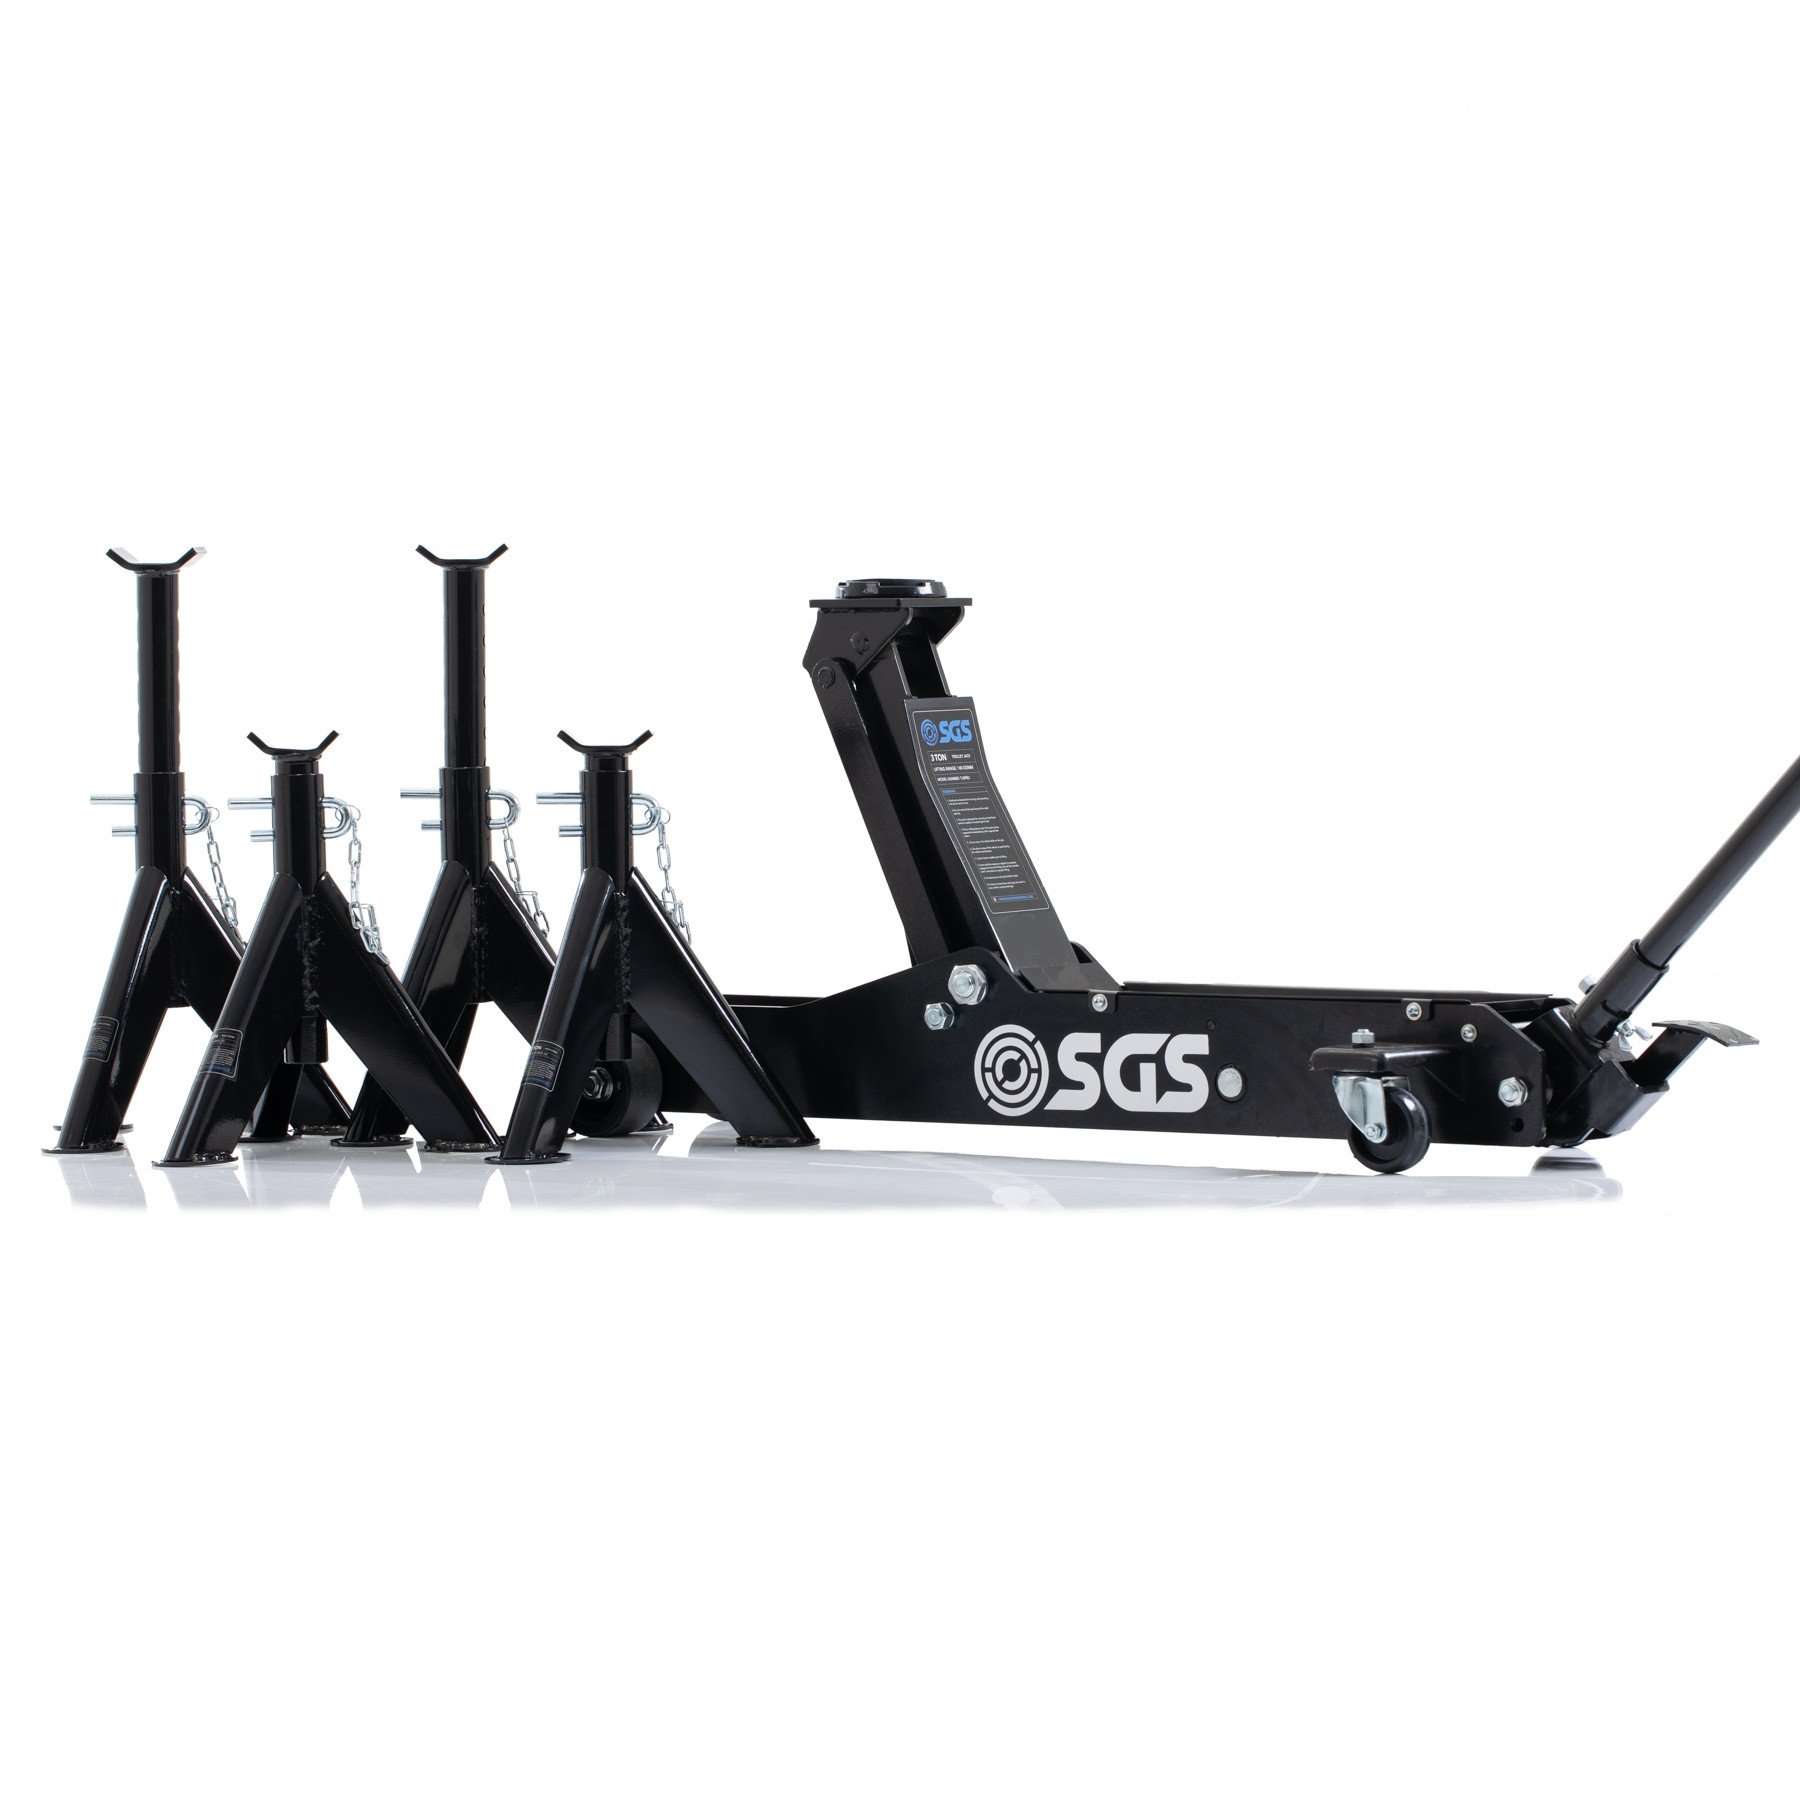 SGS 3 Ton Long Reach Service Trolley Jack with four 3 Ton Heavy Duty Axle Stands